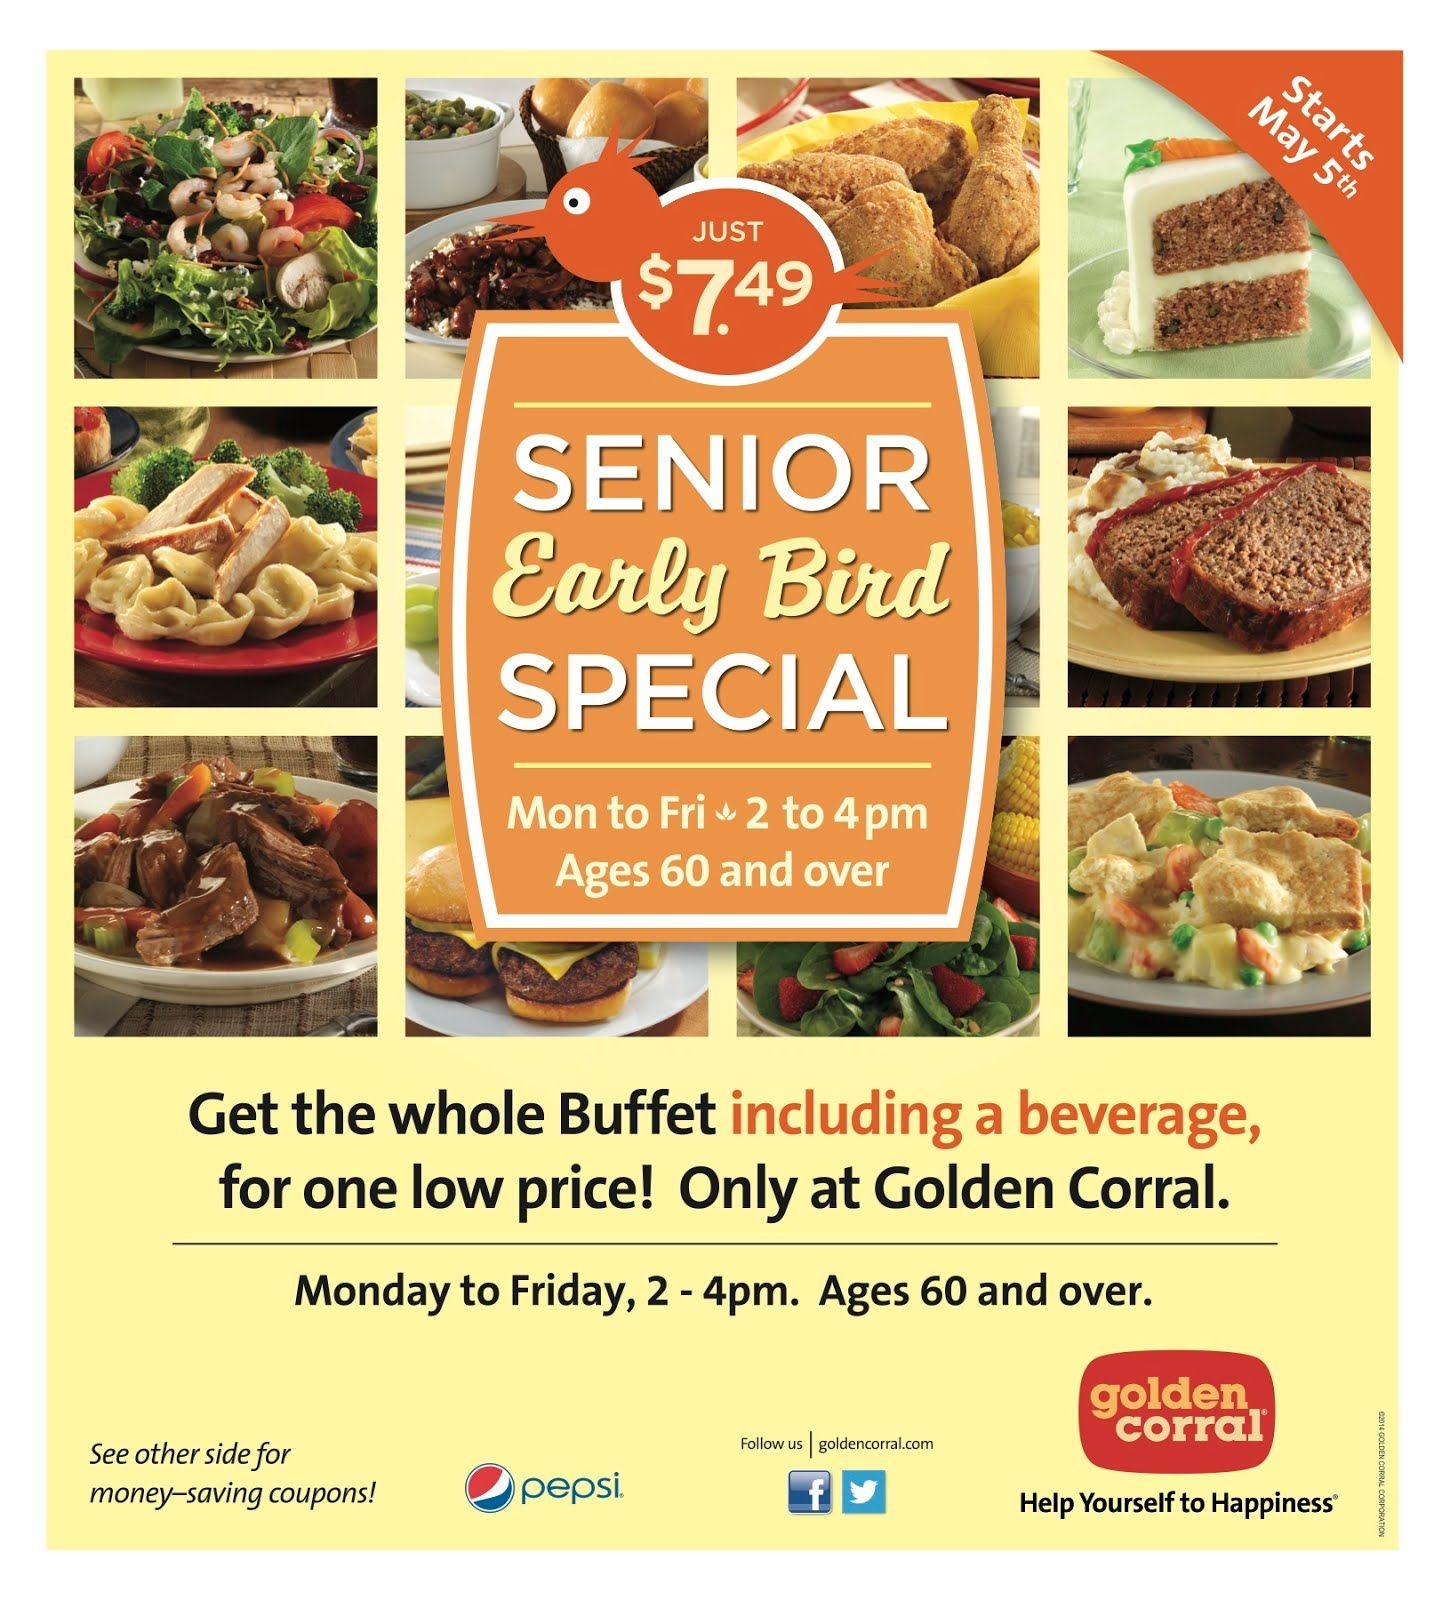 Golden Corral: Senior Early Bird Special, M-F 2-4Pm, 60+, For $7.49 - Free Las Vegas Buffet Coupons Printable